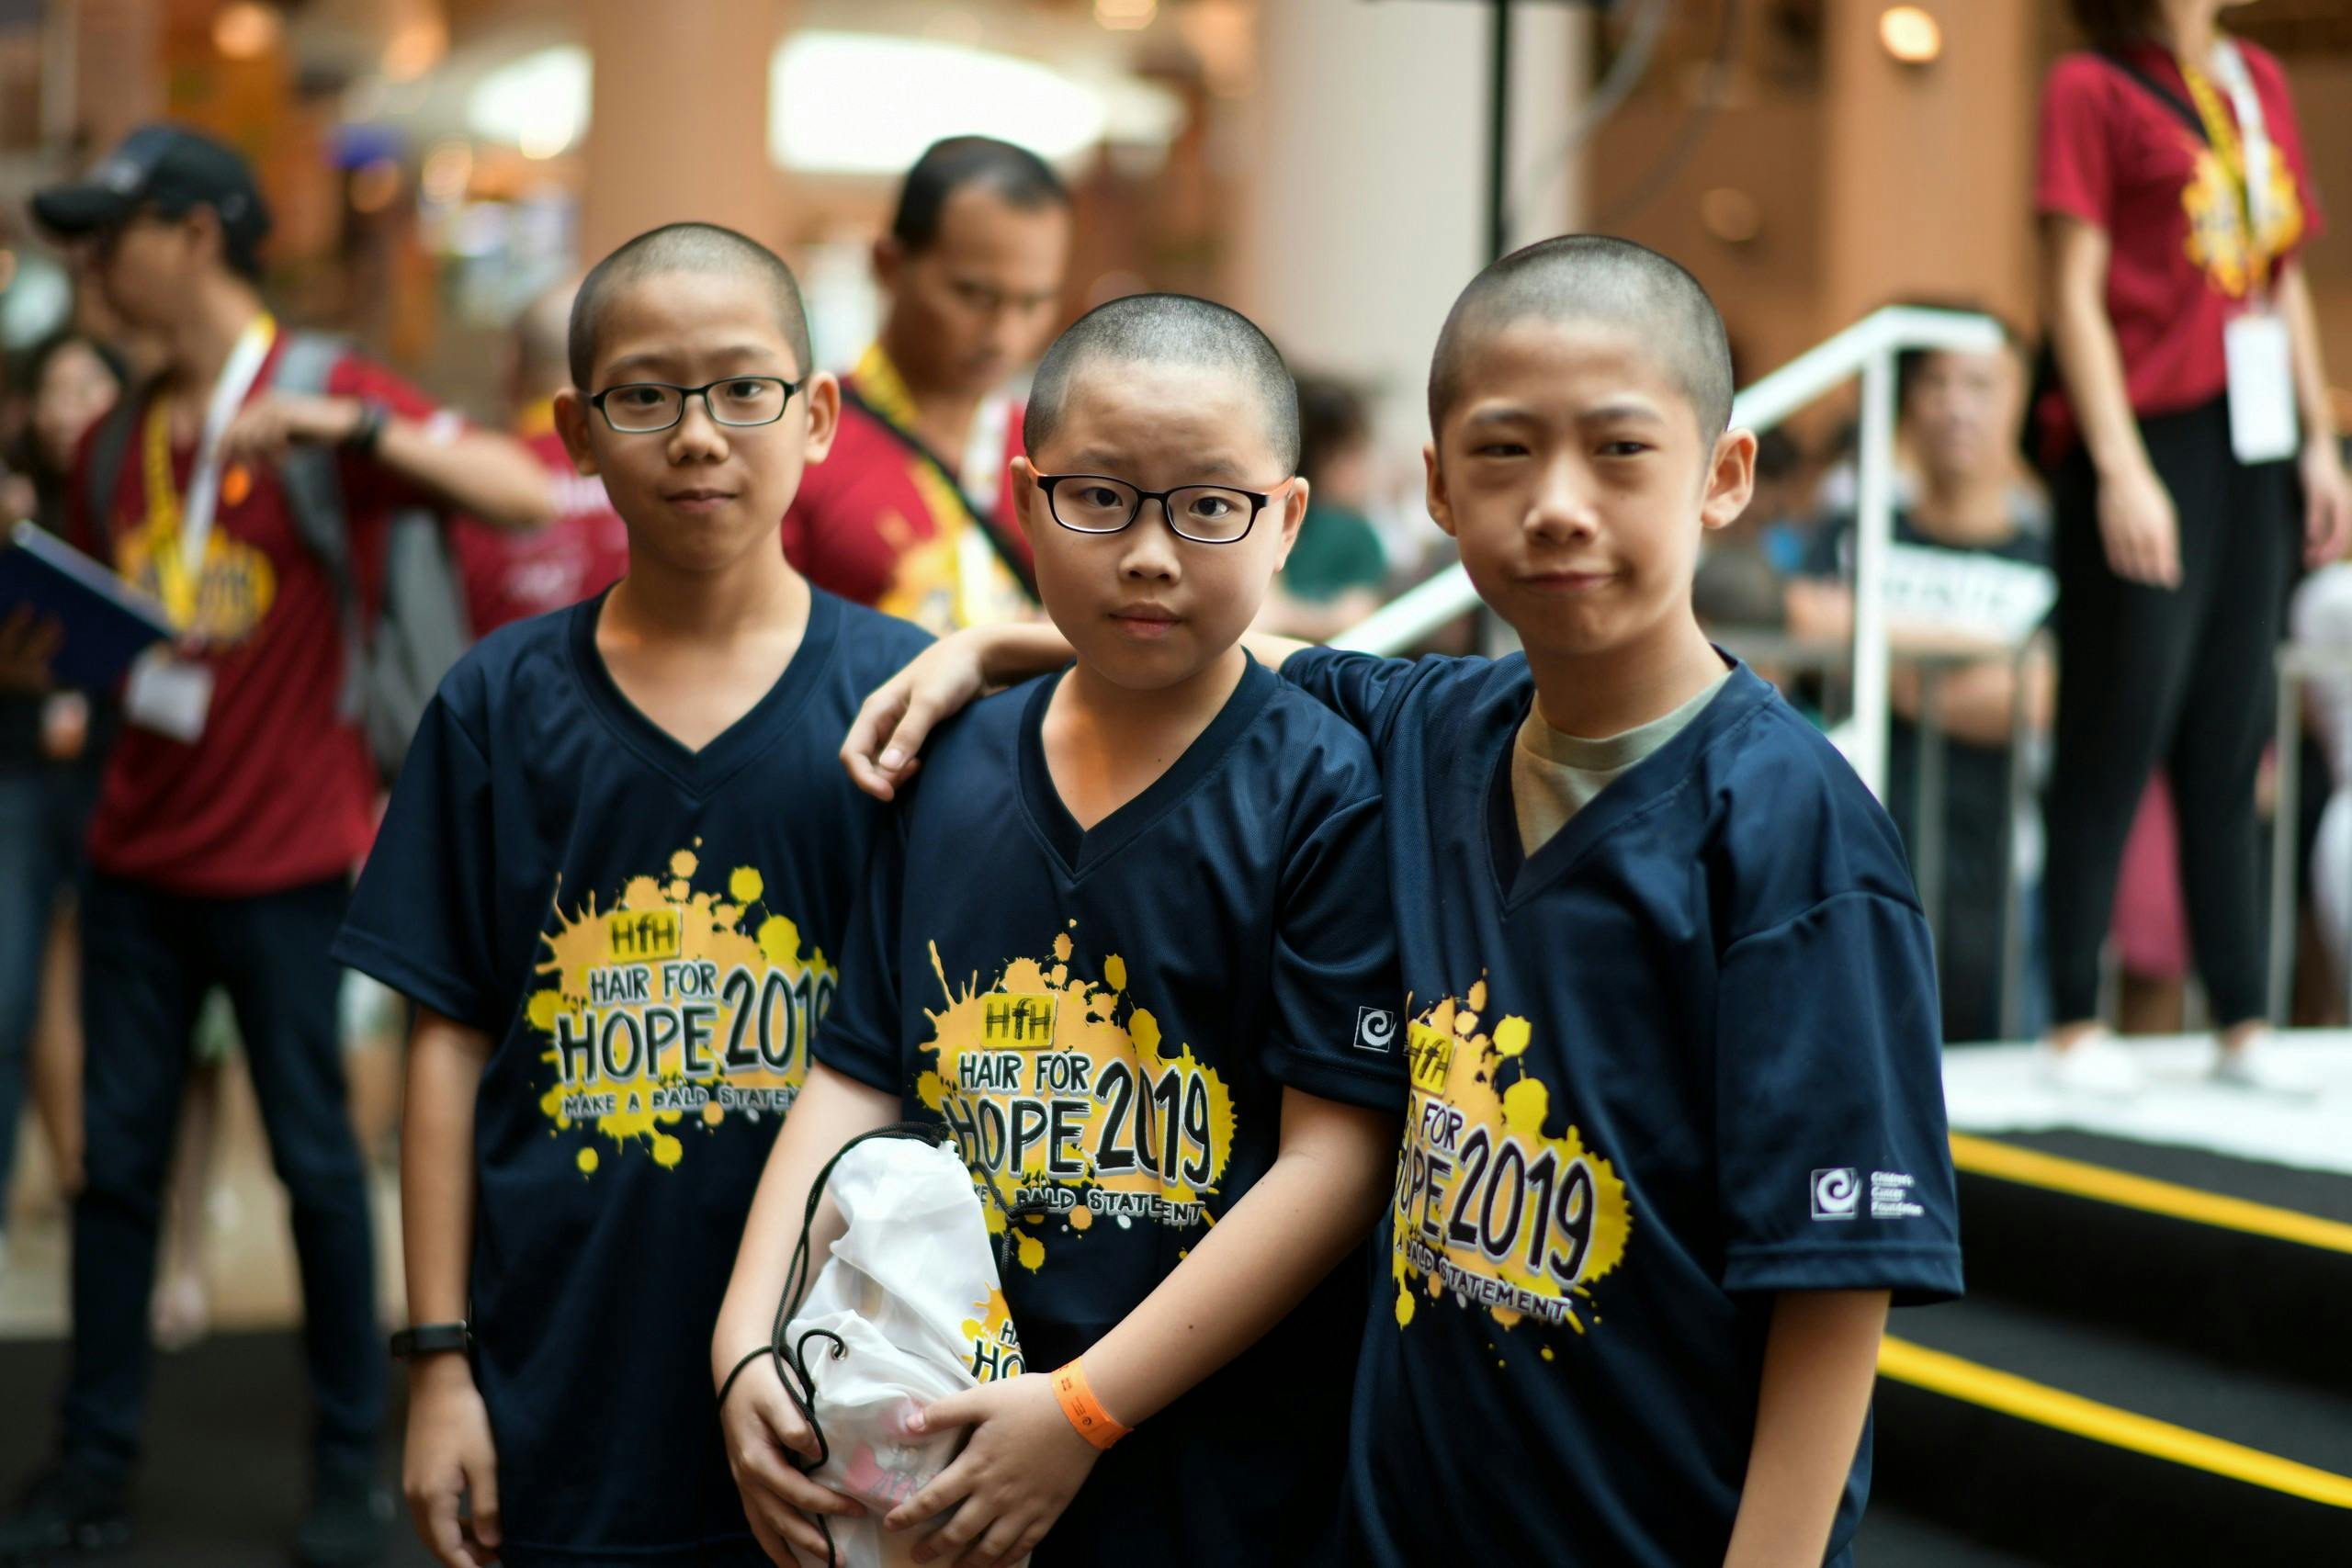 Children with shaved heads for CCF